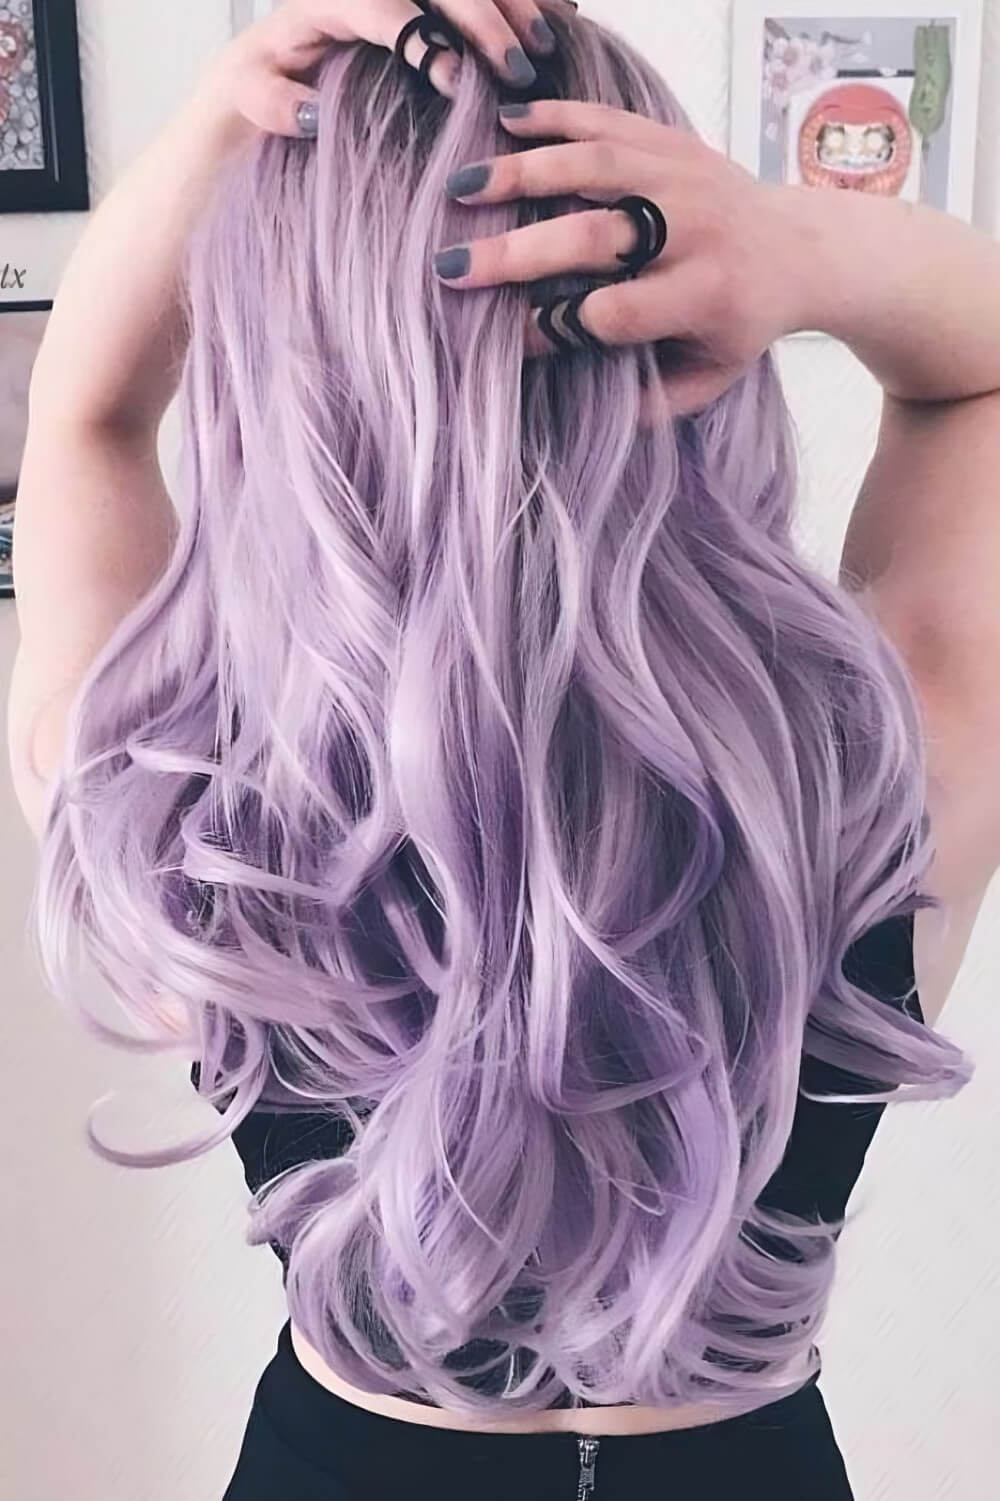 25 Lavender Hair Ideas Every Pretty Girl Should Check Out - 183